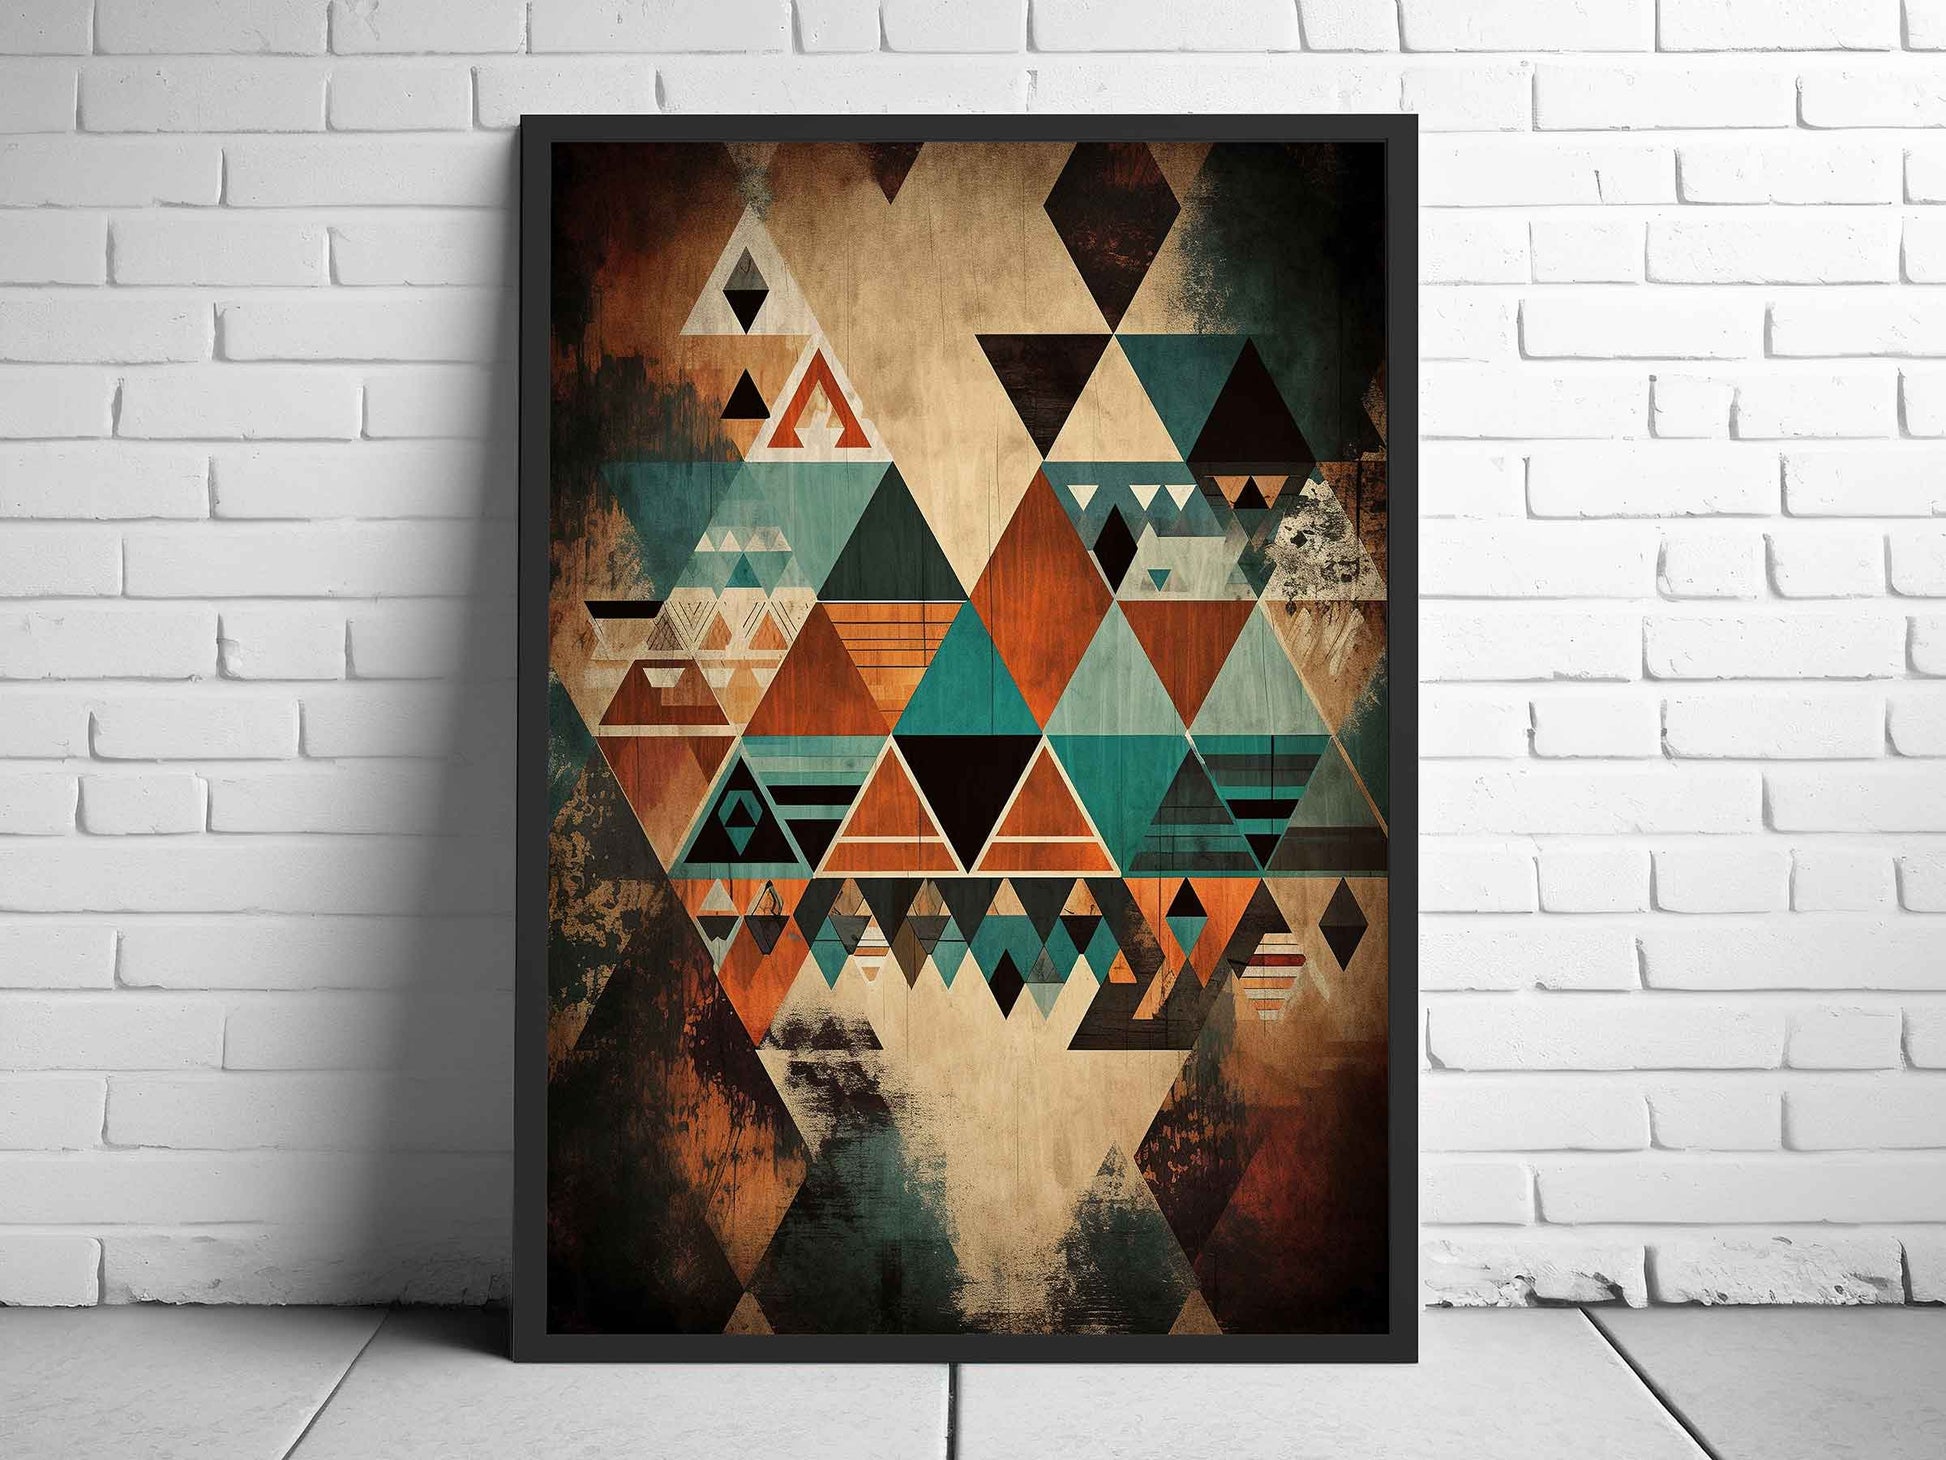 Framed Image of Boho Abstract Aztec Geometric Tribal Style Wall Art Poster Prints